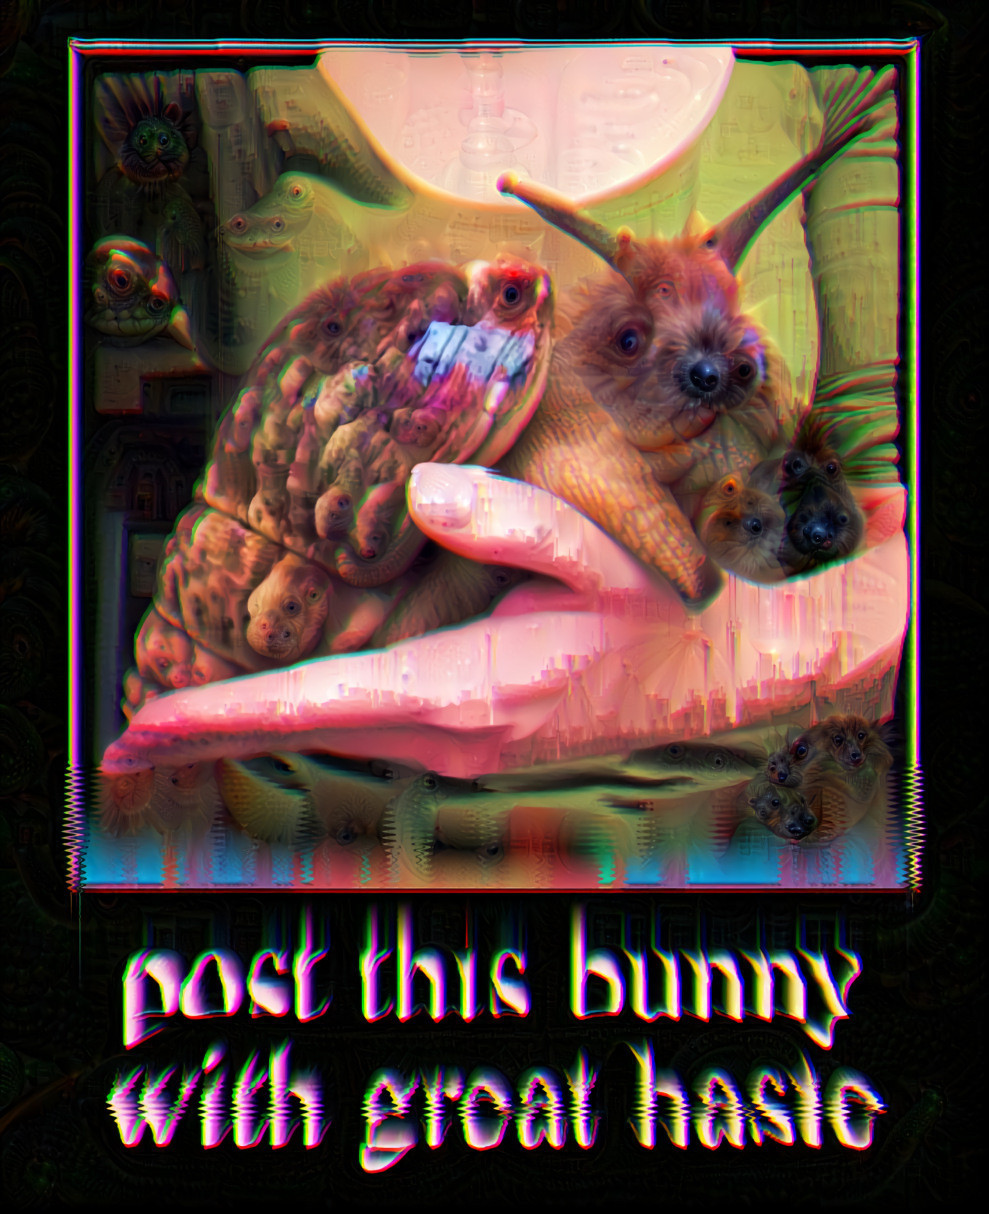 Post this bunny with great haste